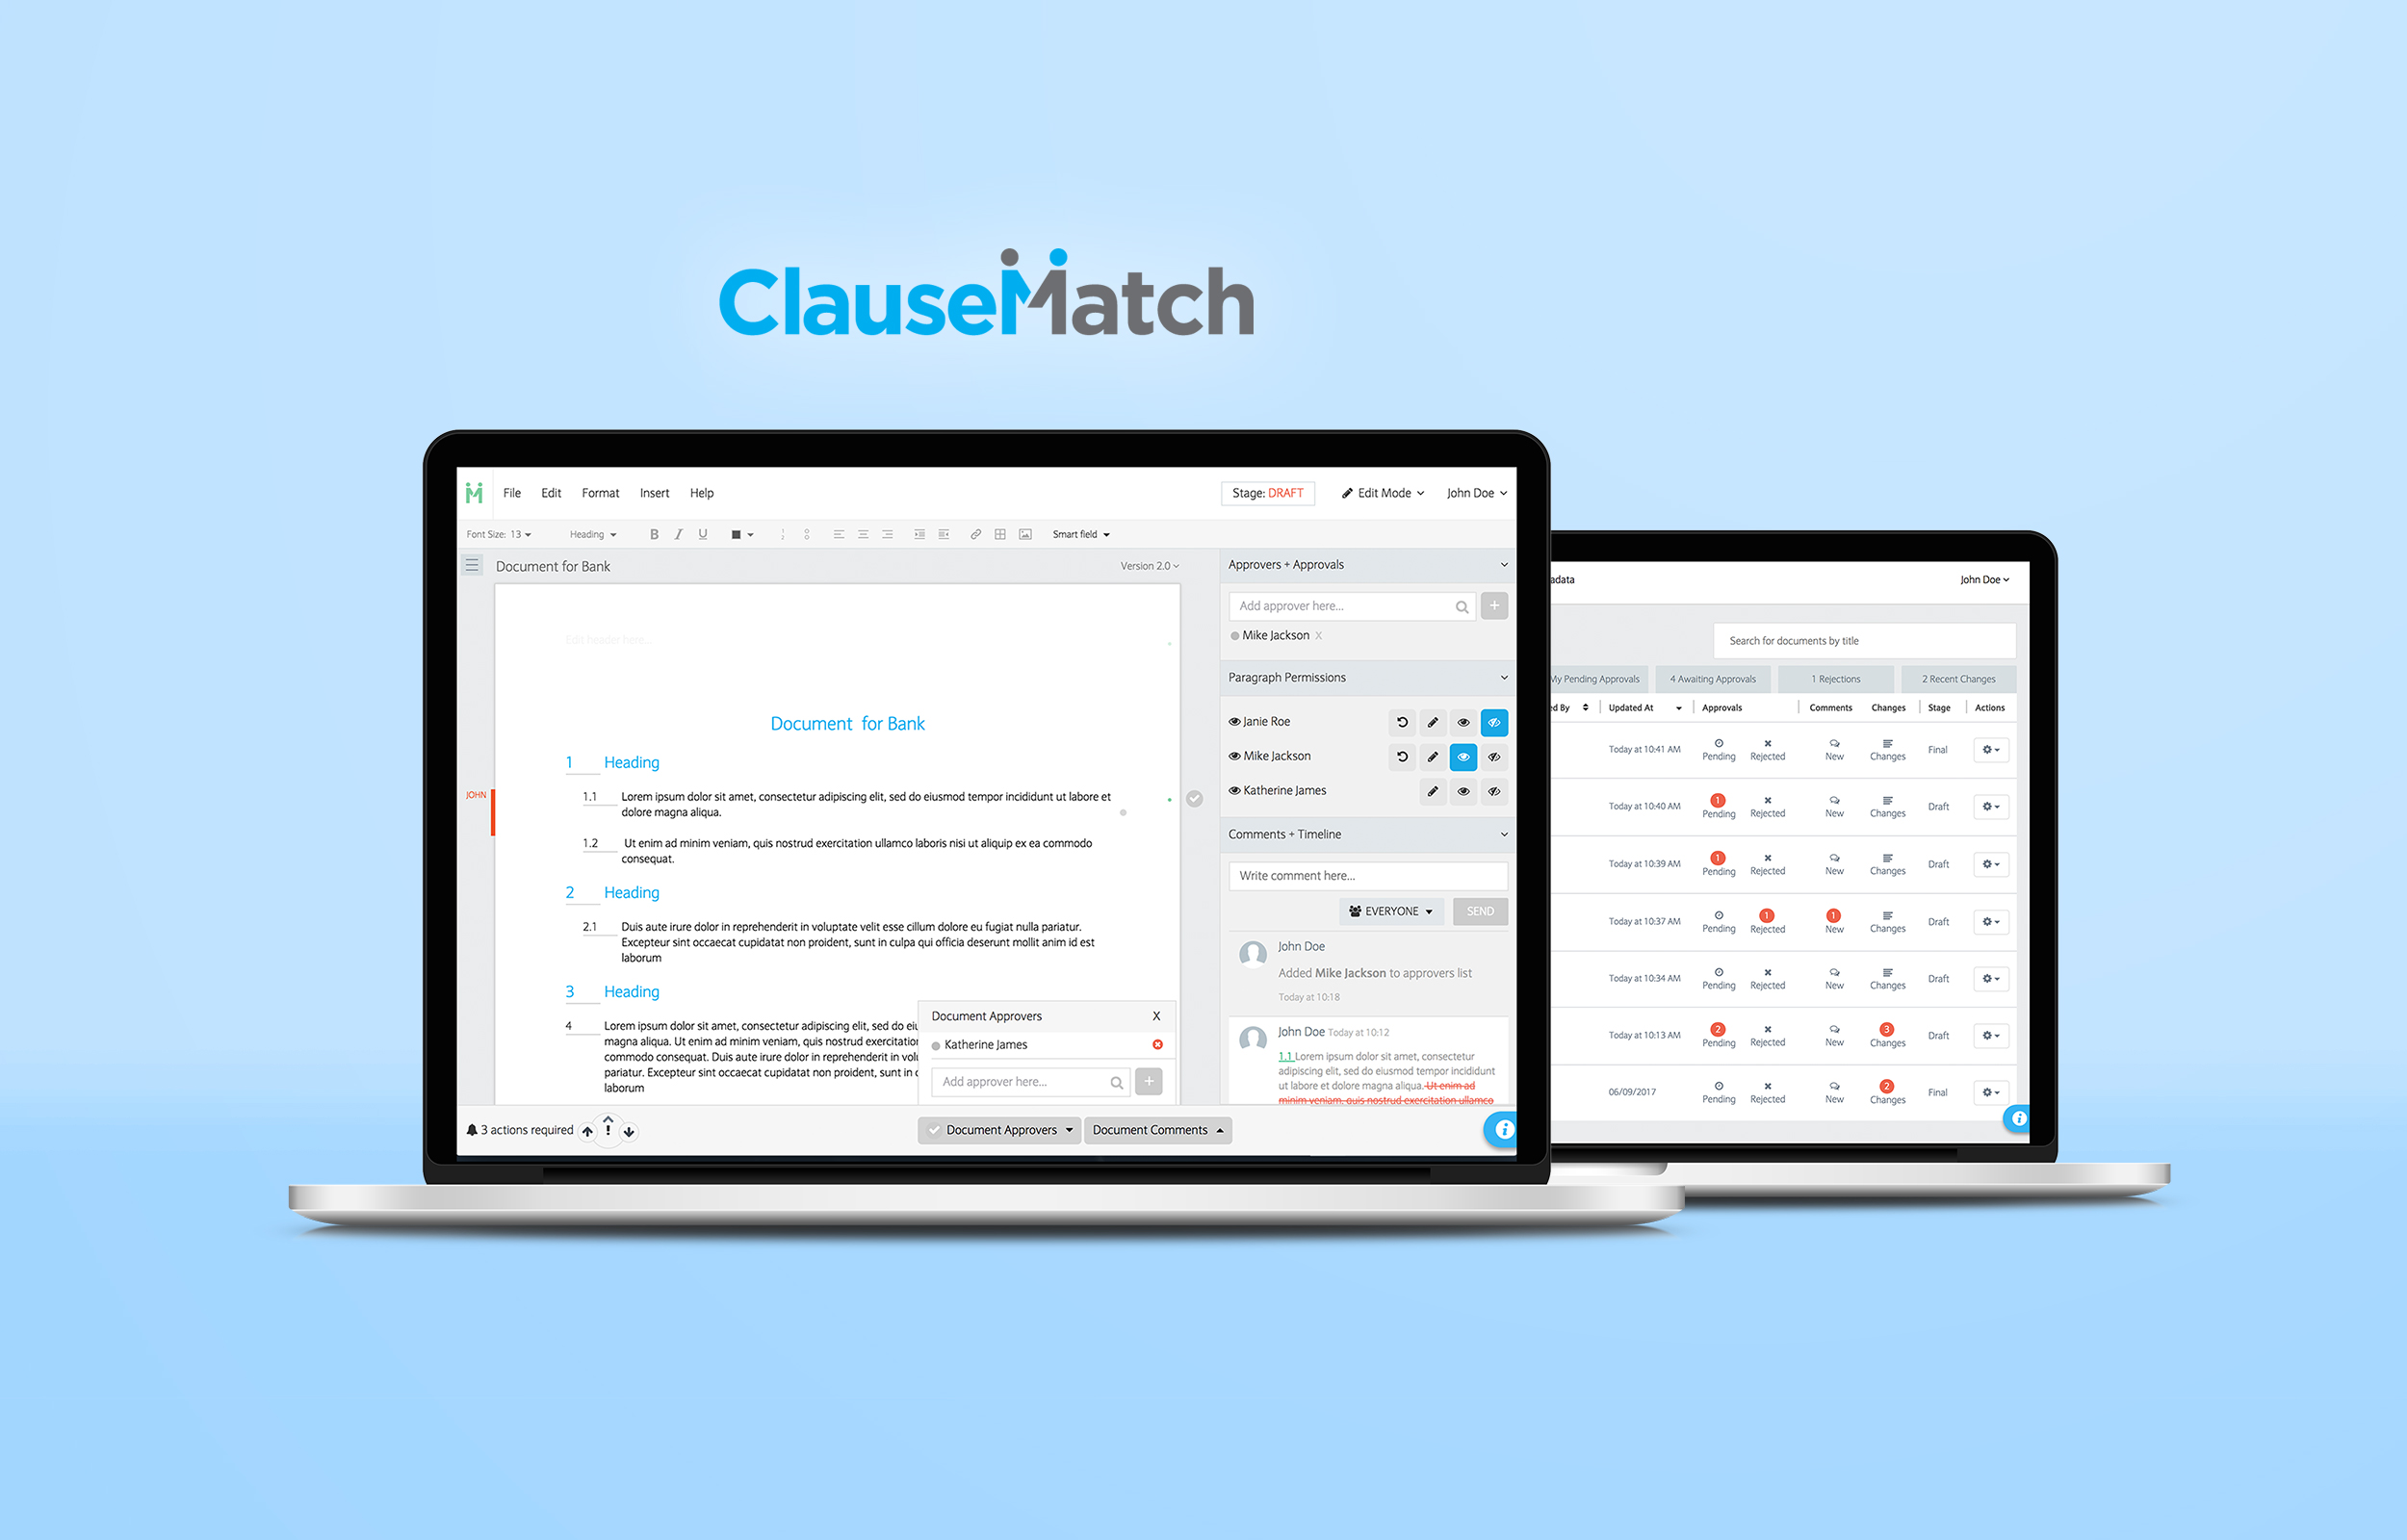 Clausematch Raises £1.25m in Seed Round to Scale Its Next-gen Document Management Platform Globally